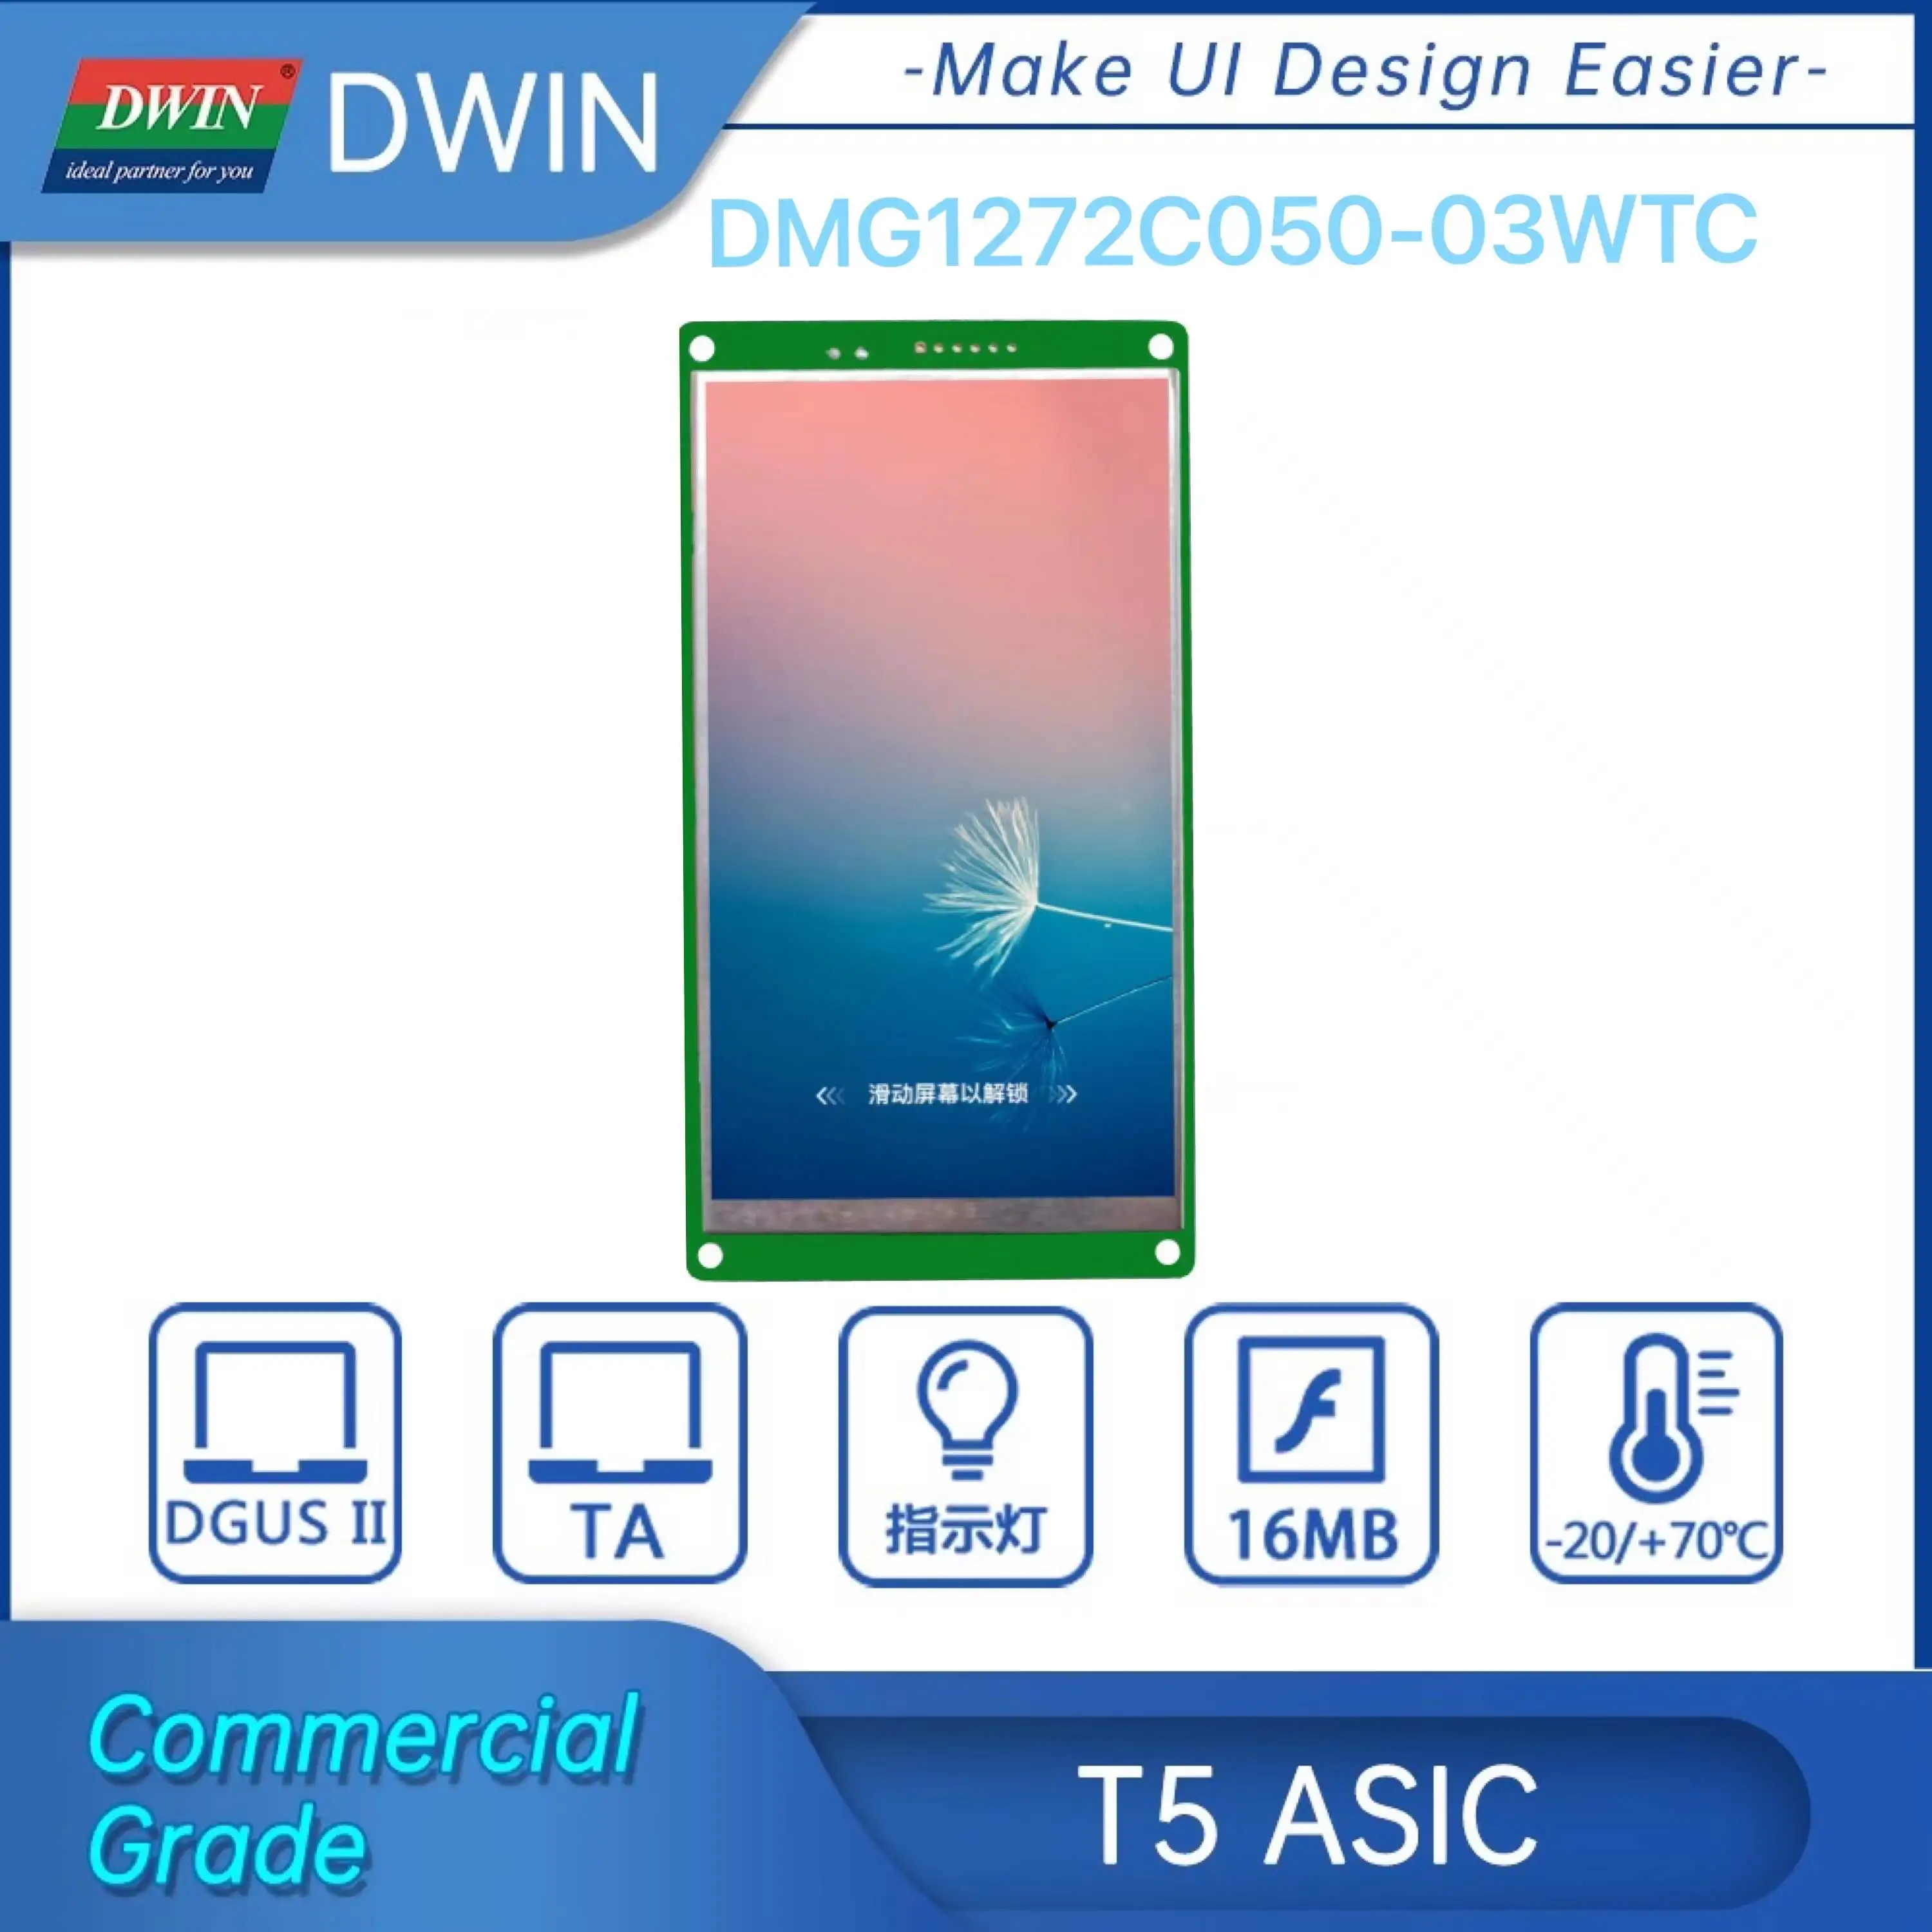 

DWIN UART LCD Module 5 Inch HMI 1280*720 Resolution 16.7 M Colors Capacitive touch display